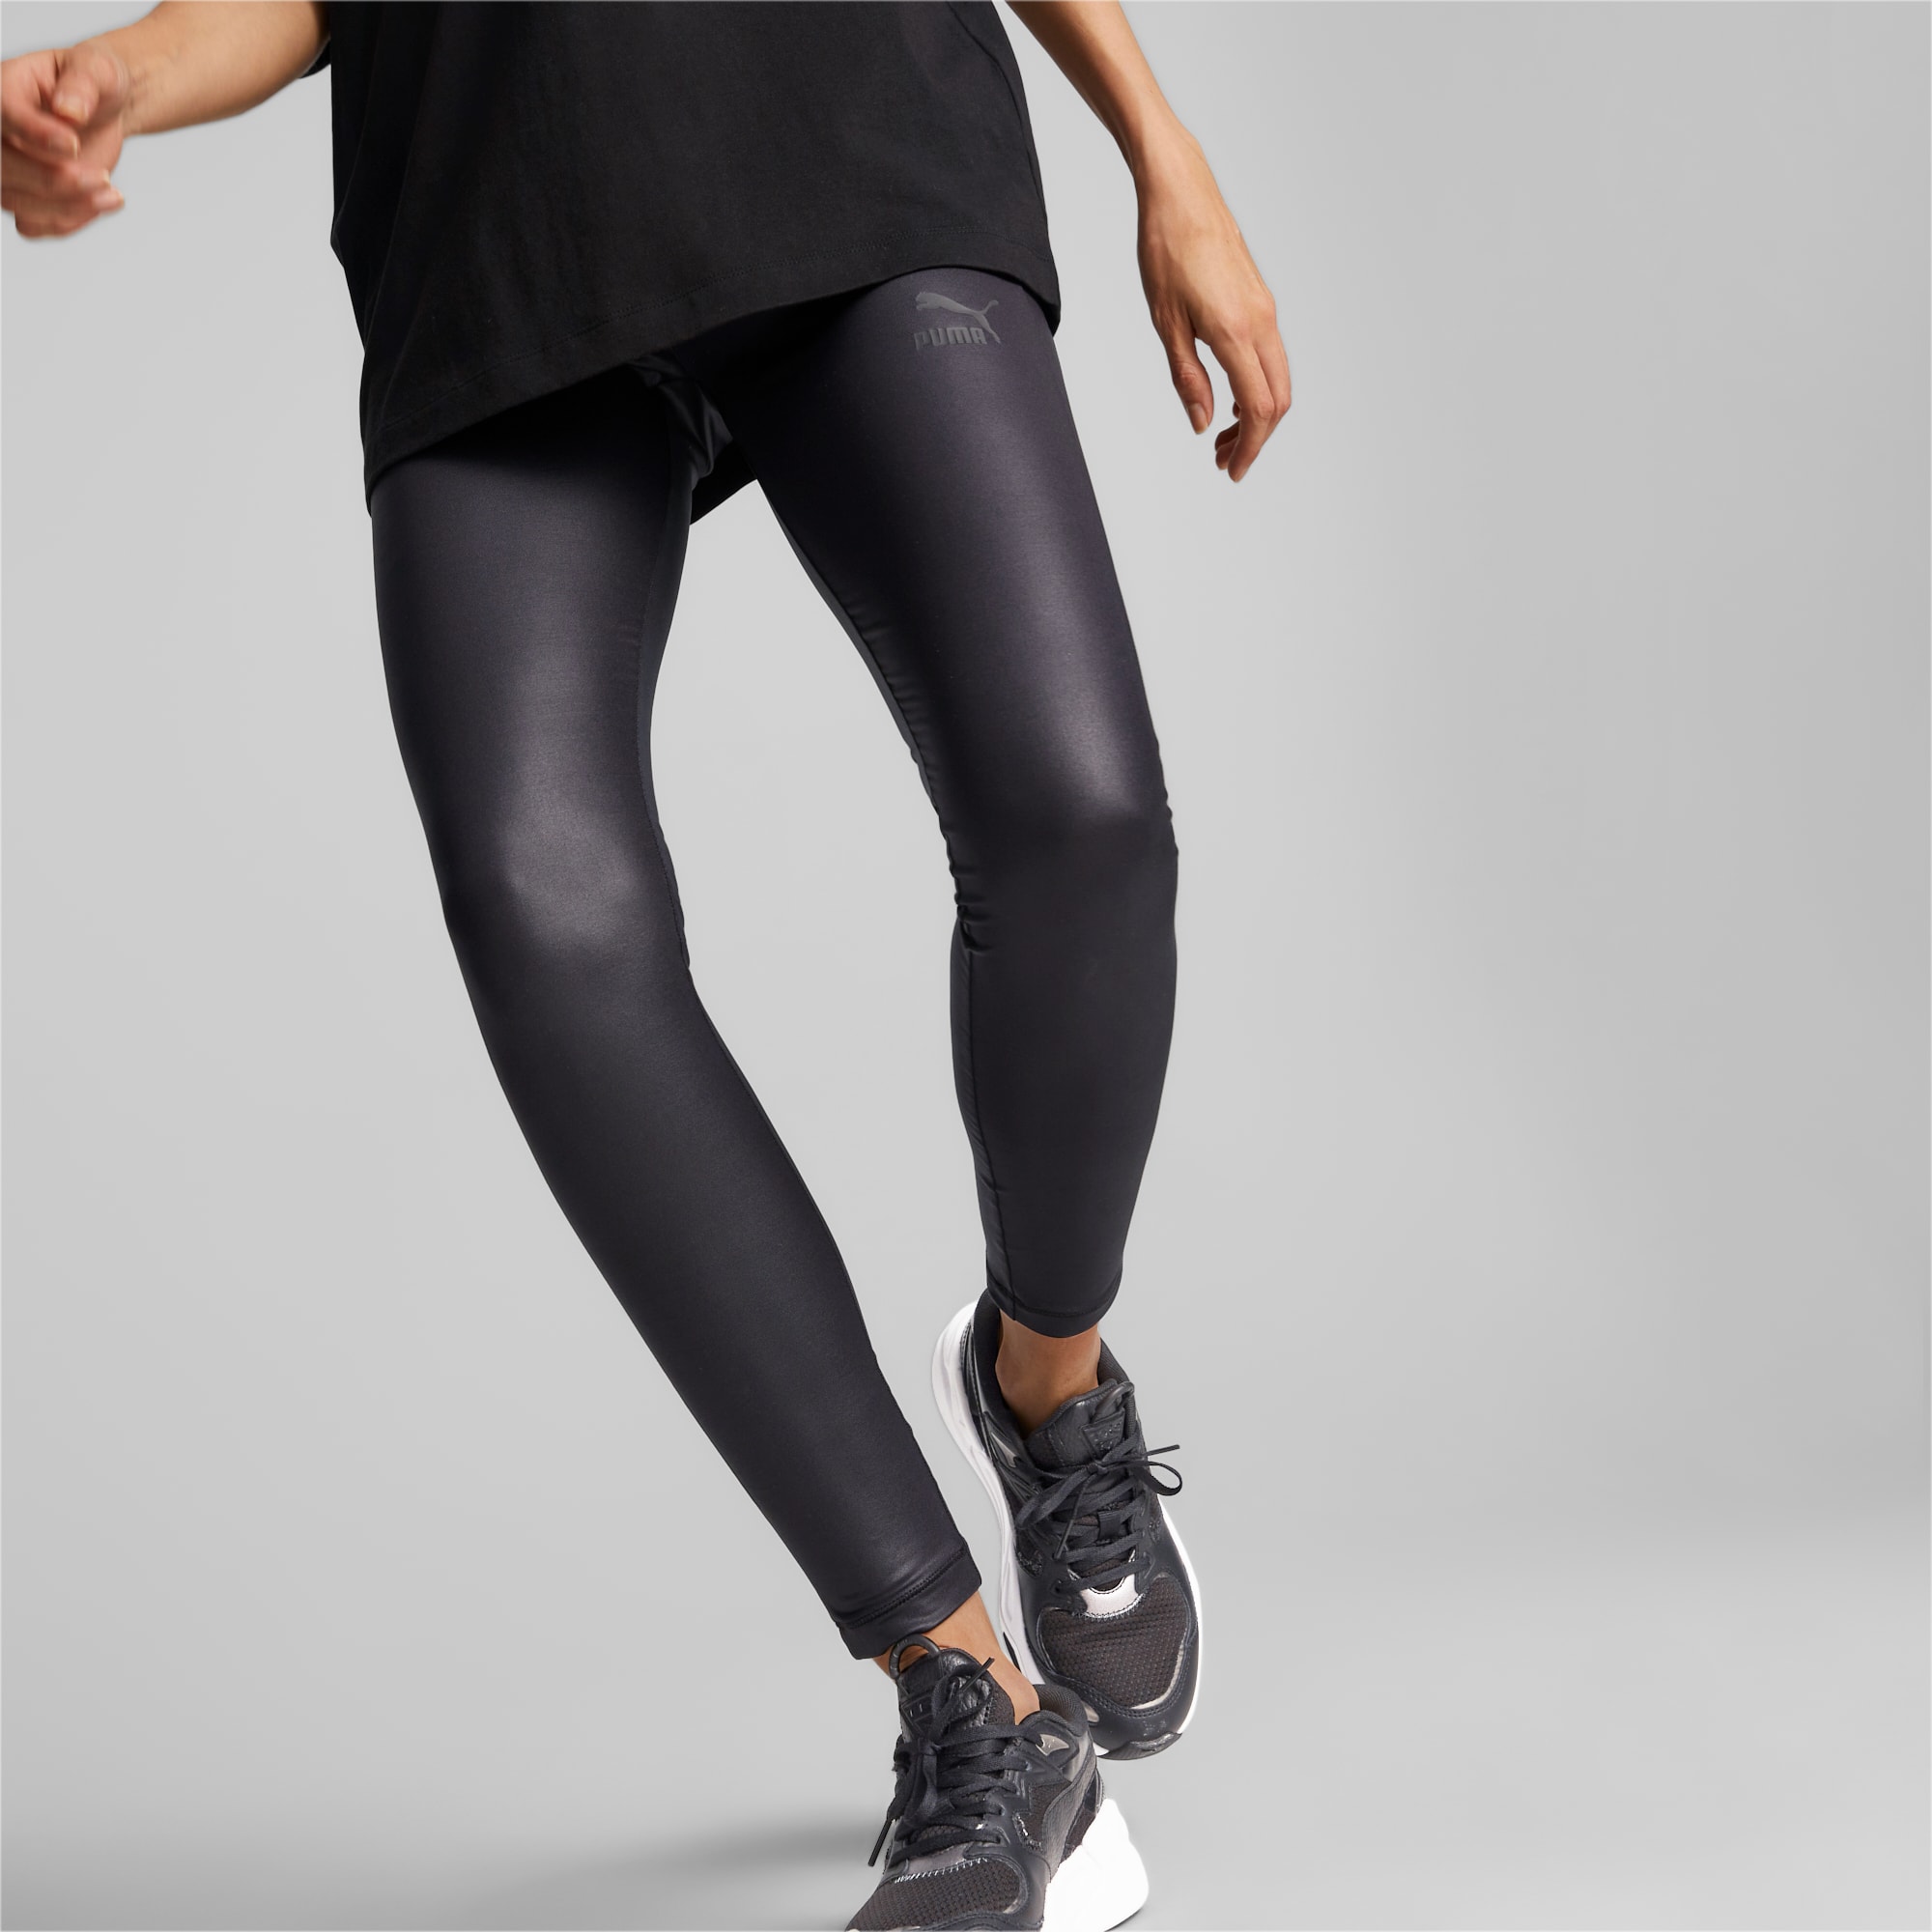 Jogger wearing leggings made from shiny spandex, Stretching